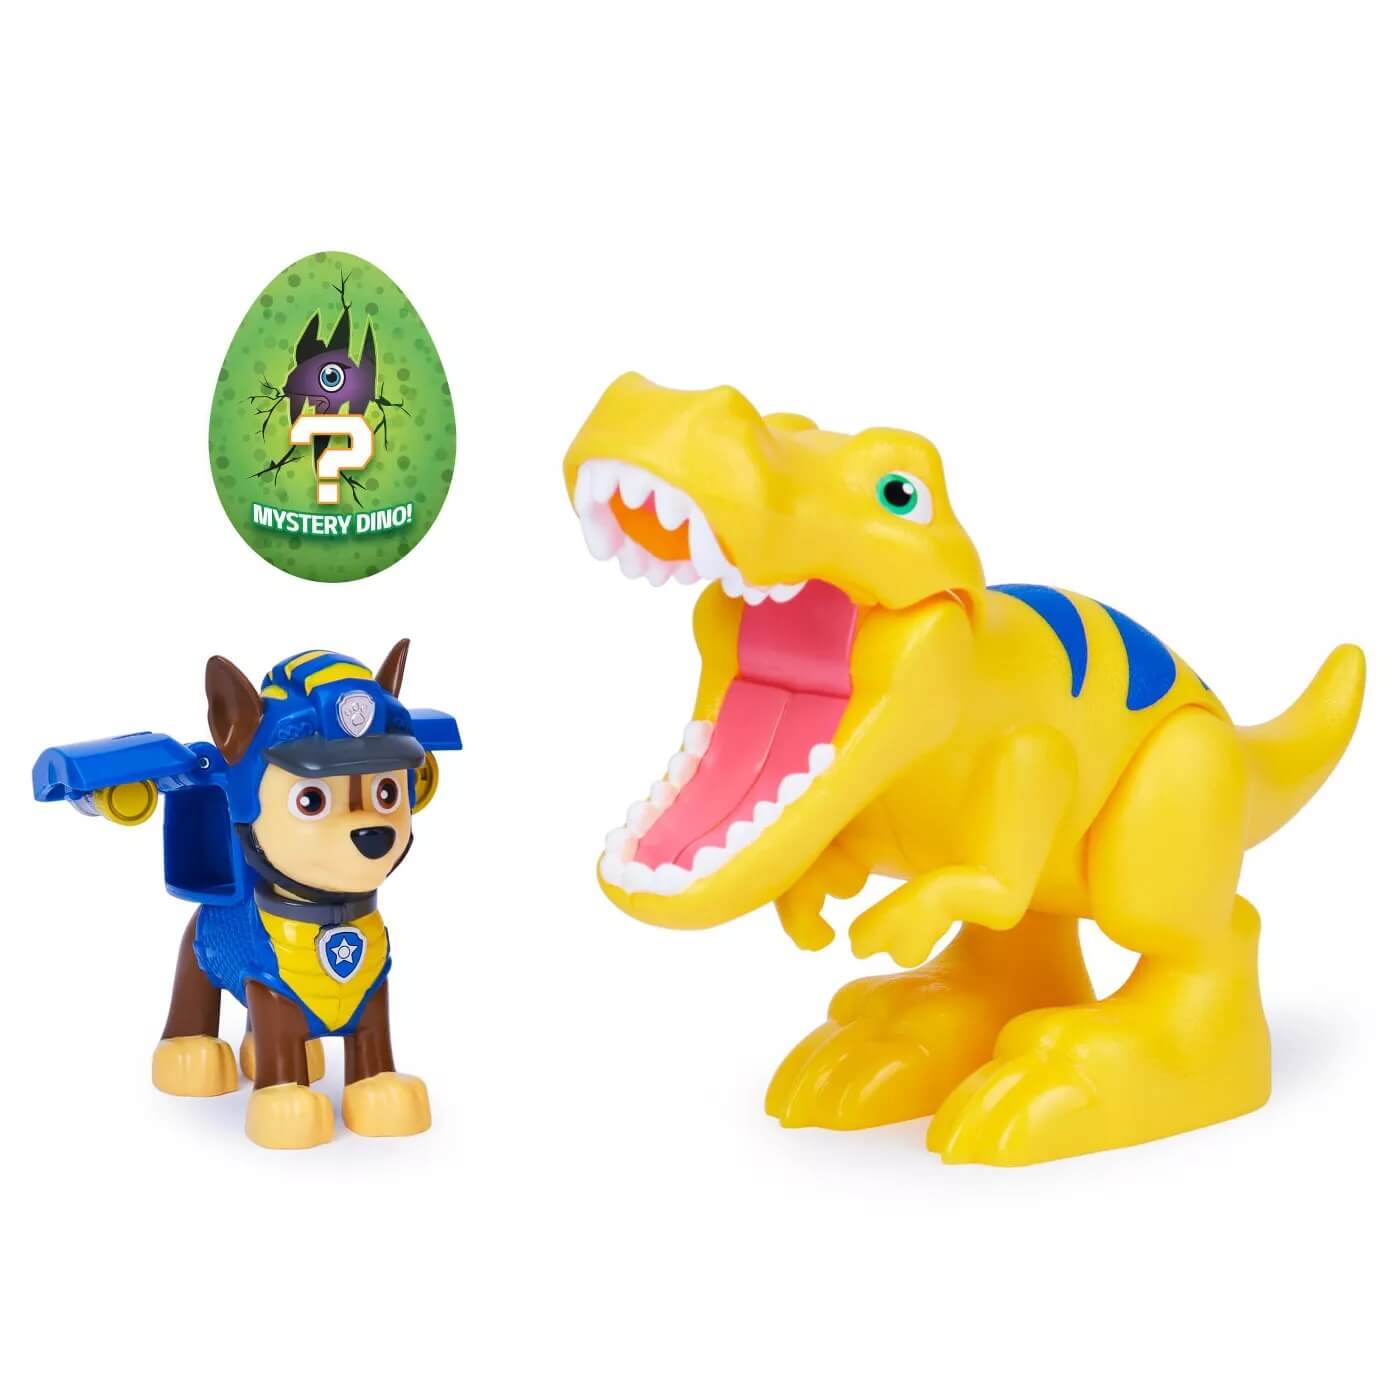 PAW Patrol Dino Rescue Chase and Tyannosaurus Rex with Mystery Dino